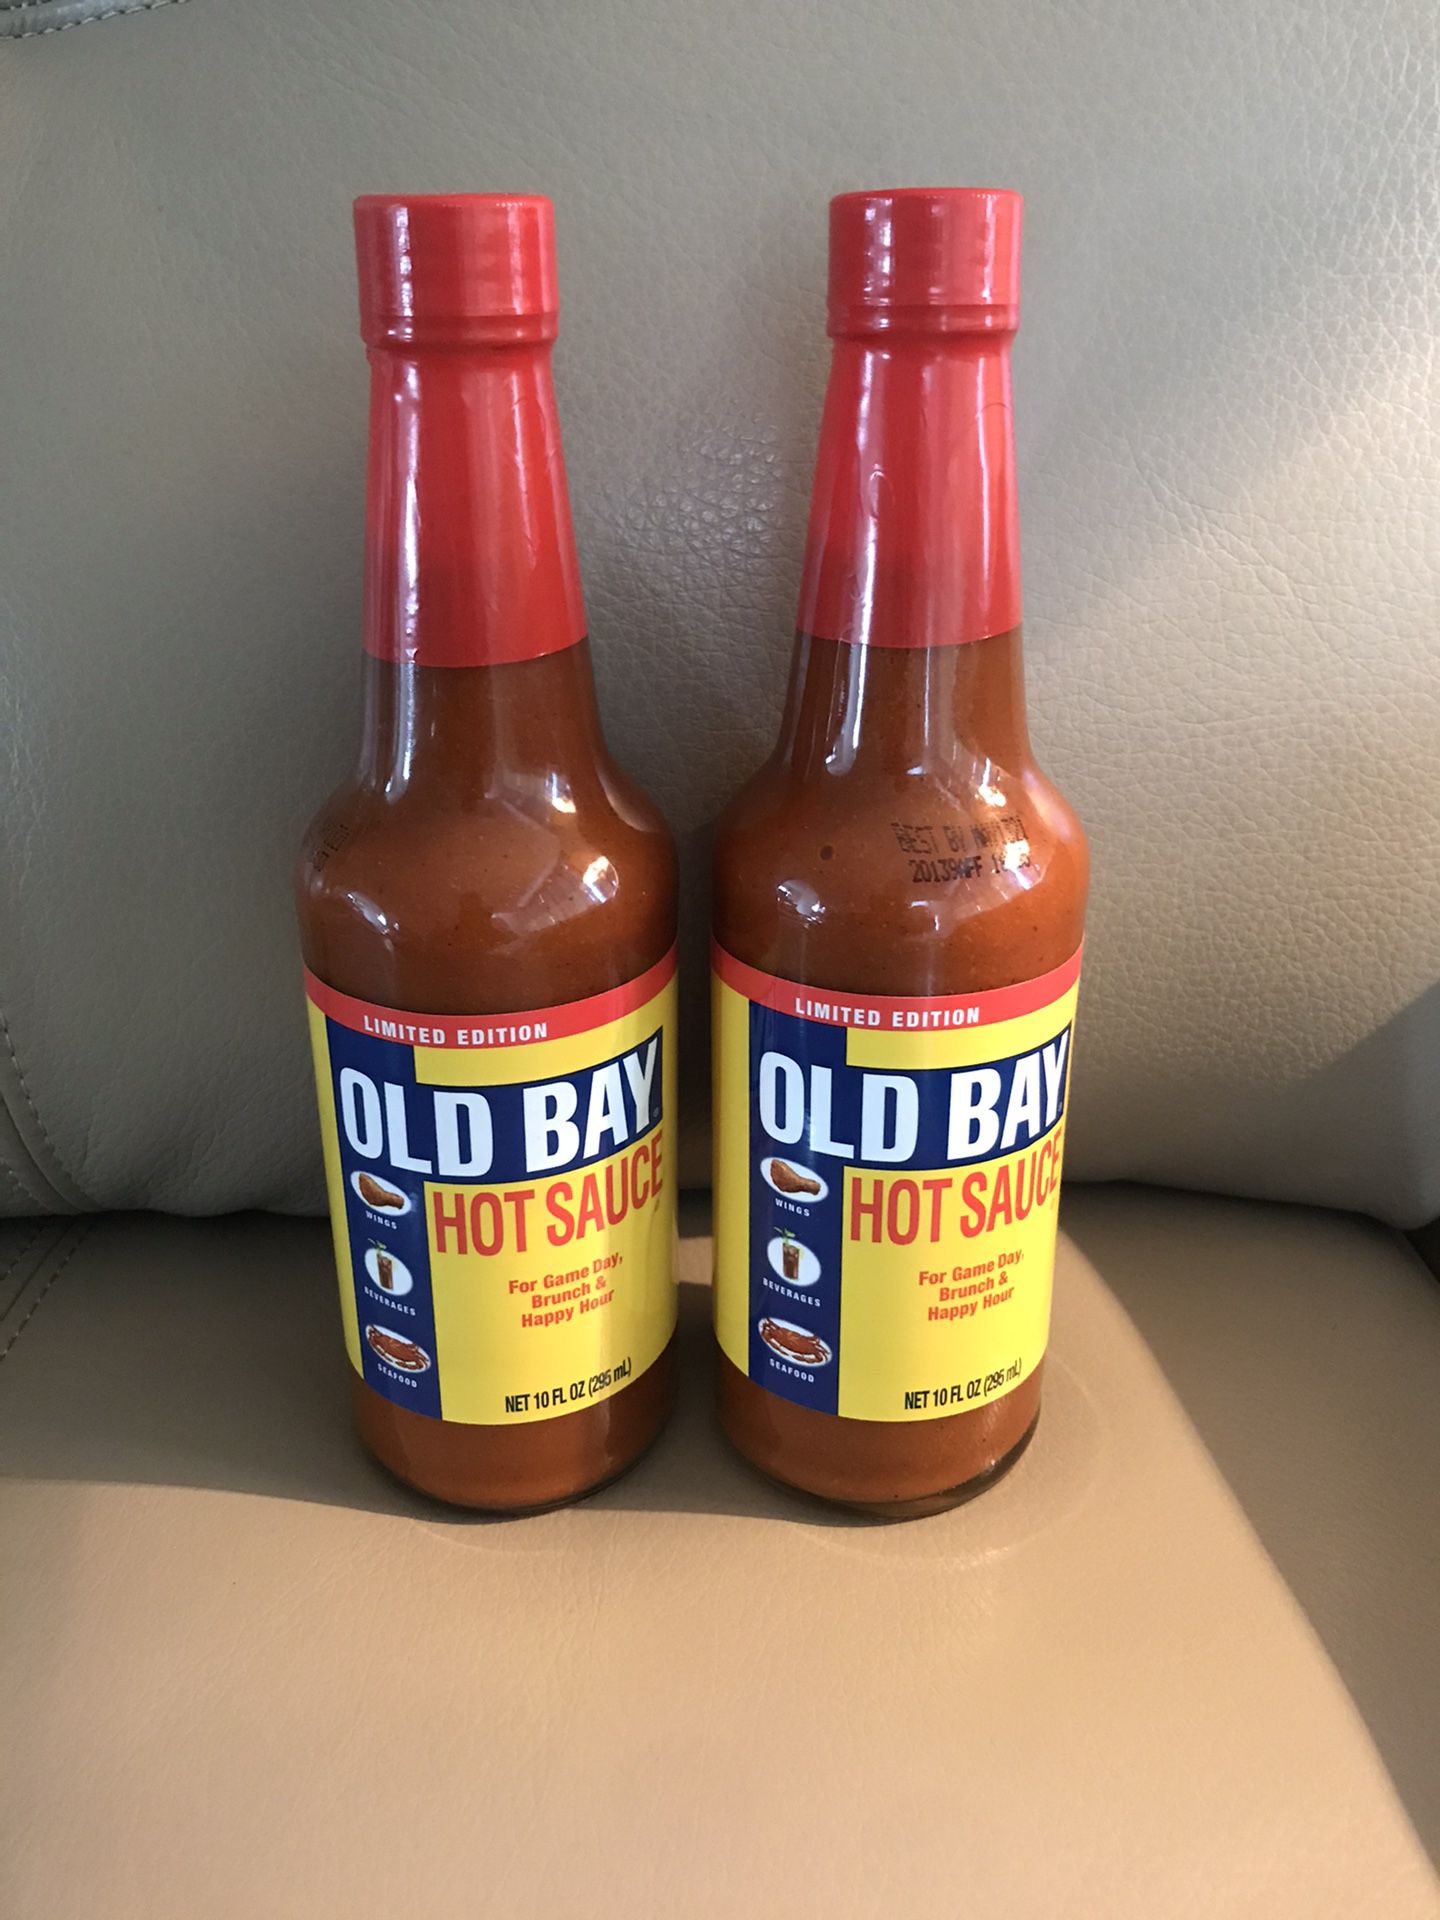 Limited Edition Old Bay Hot Sauce